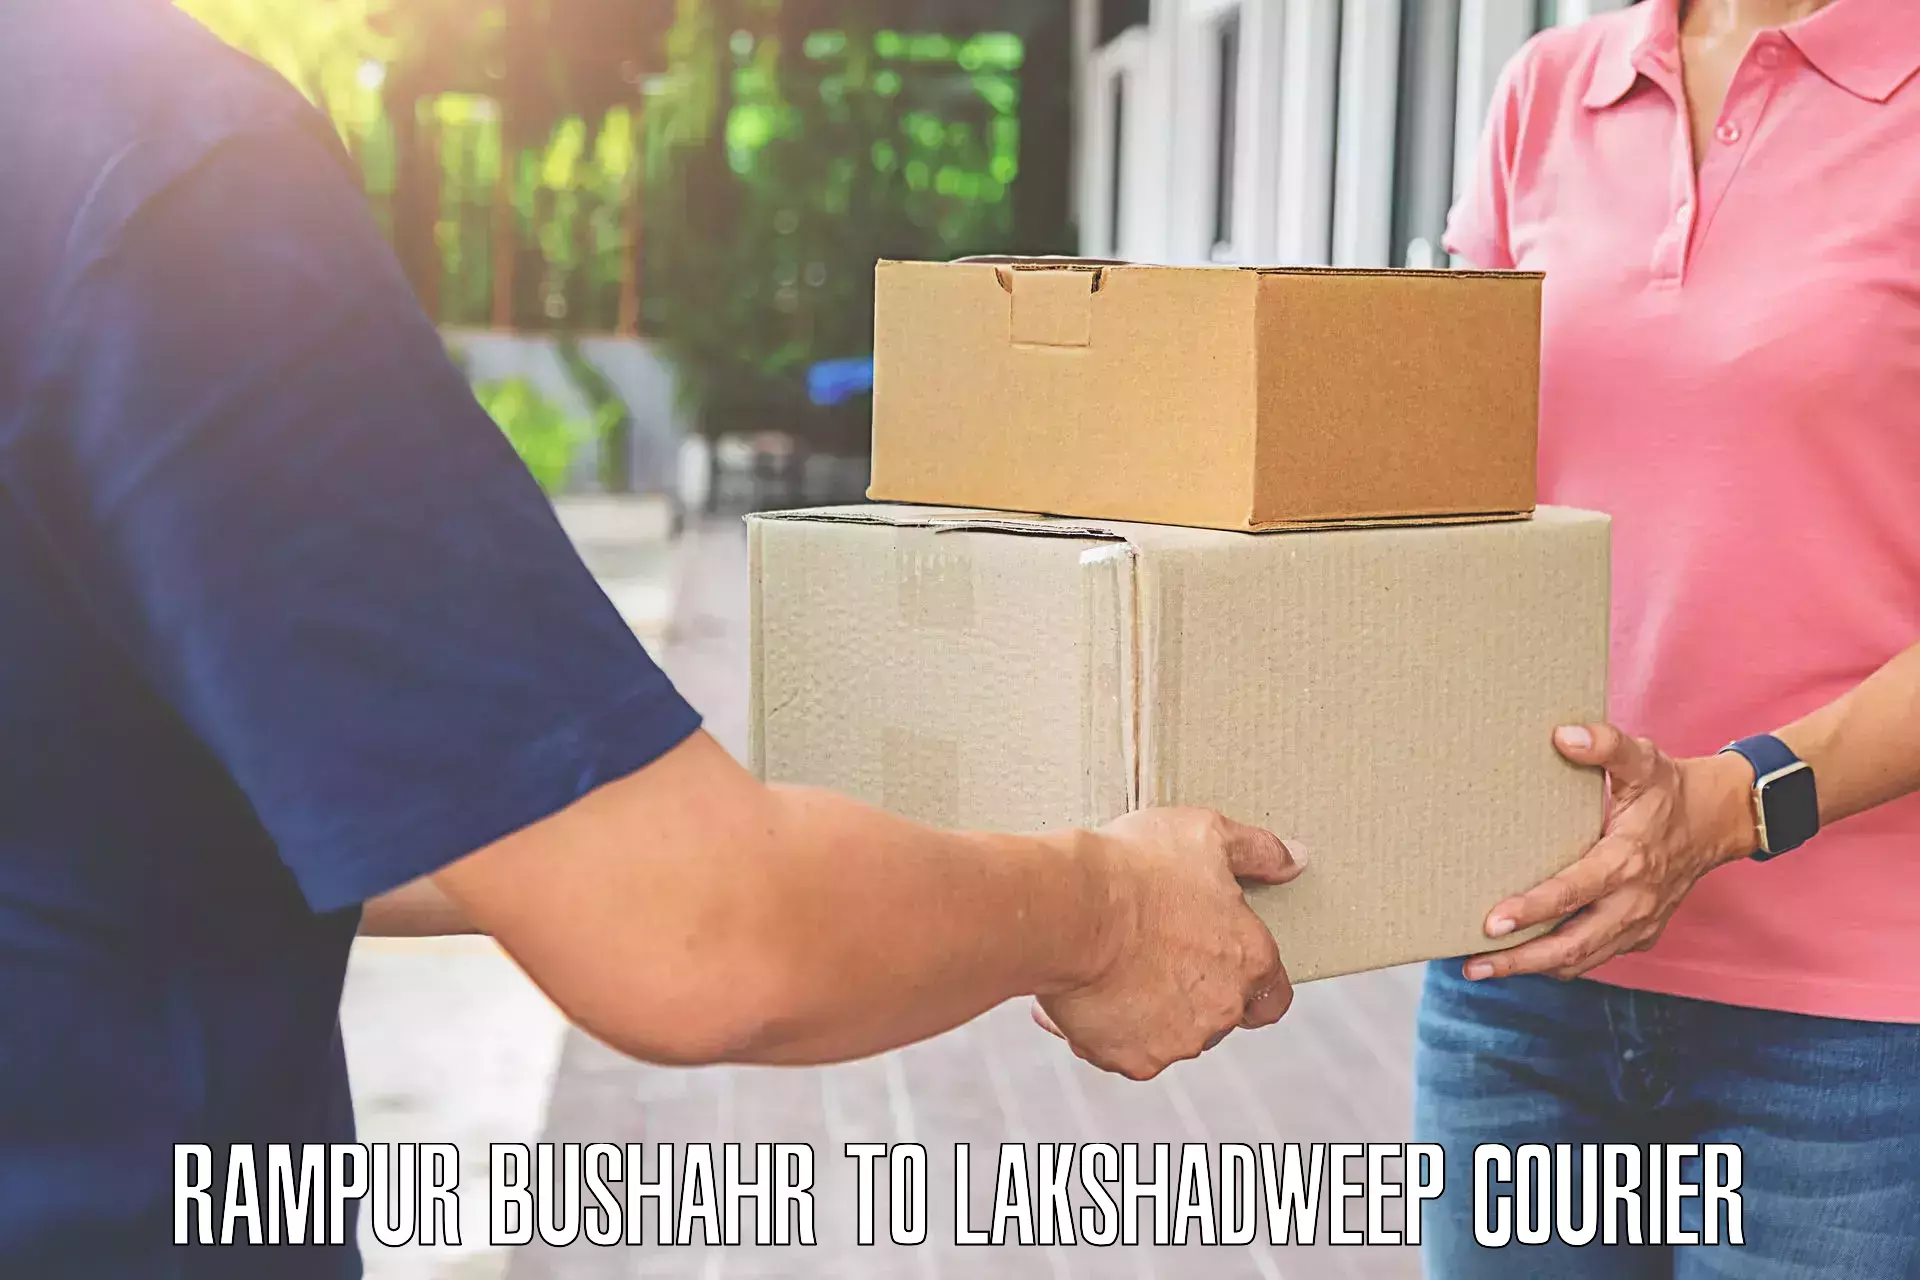 Instant baggage transport quote Rampur Bushahr to Lakshadweep